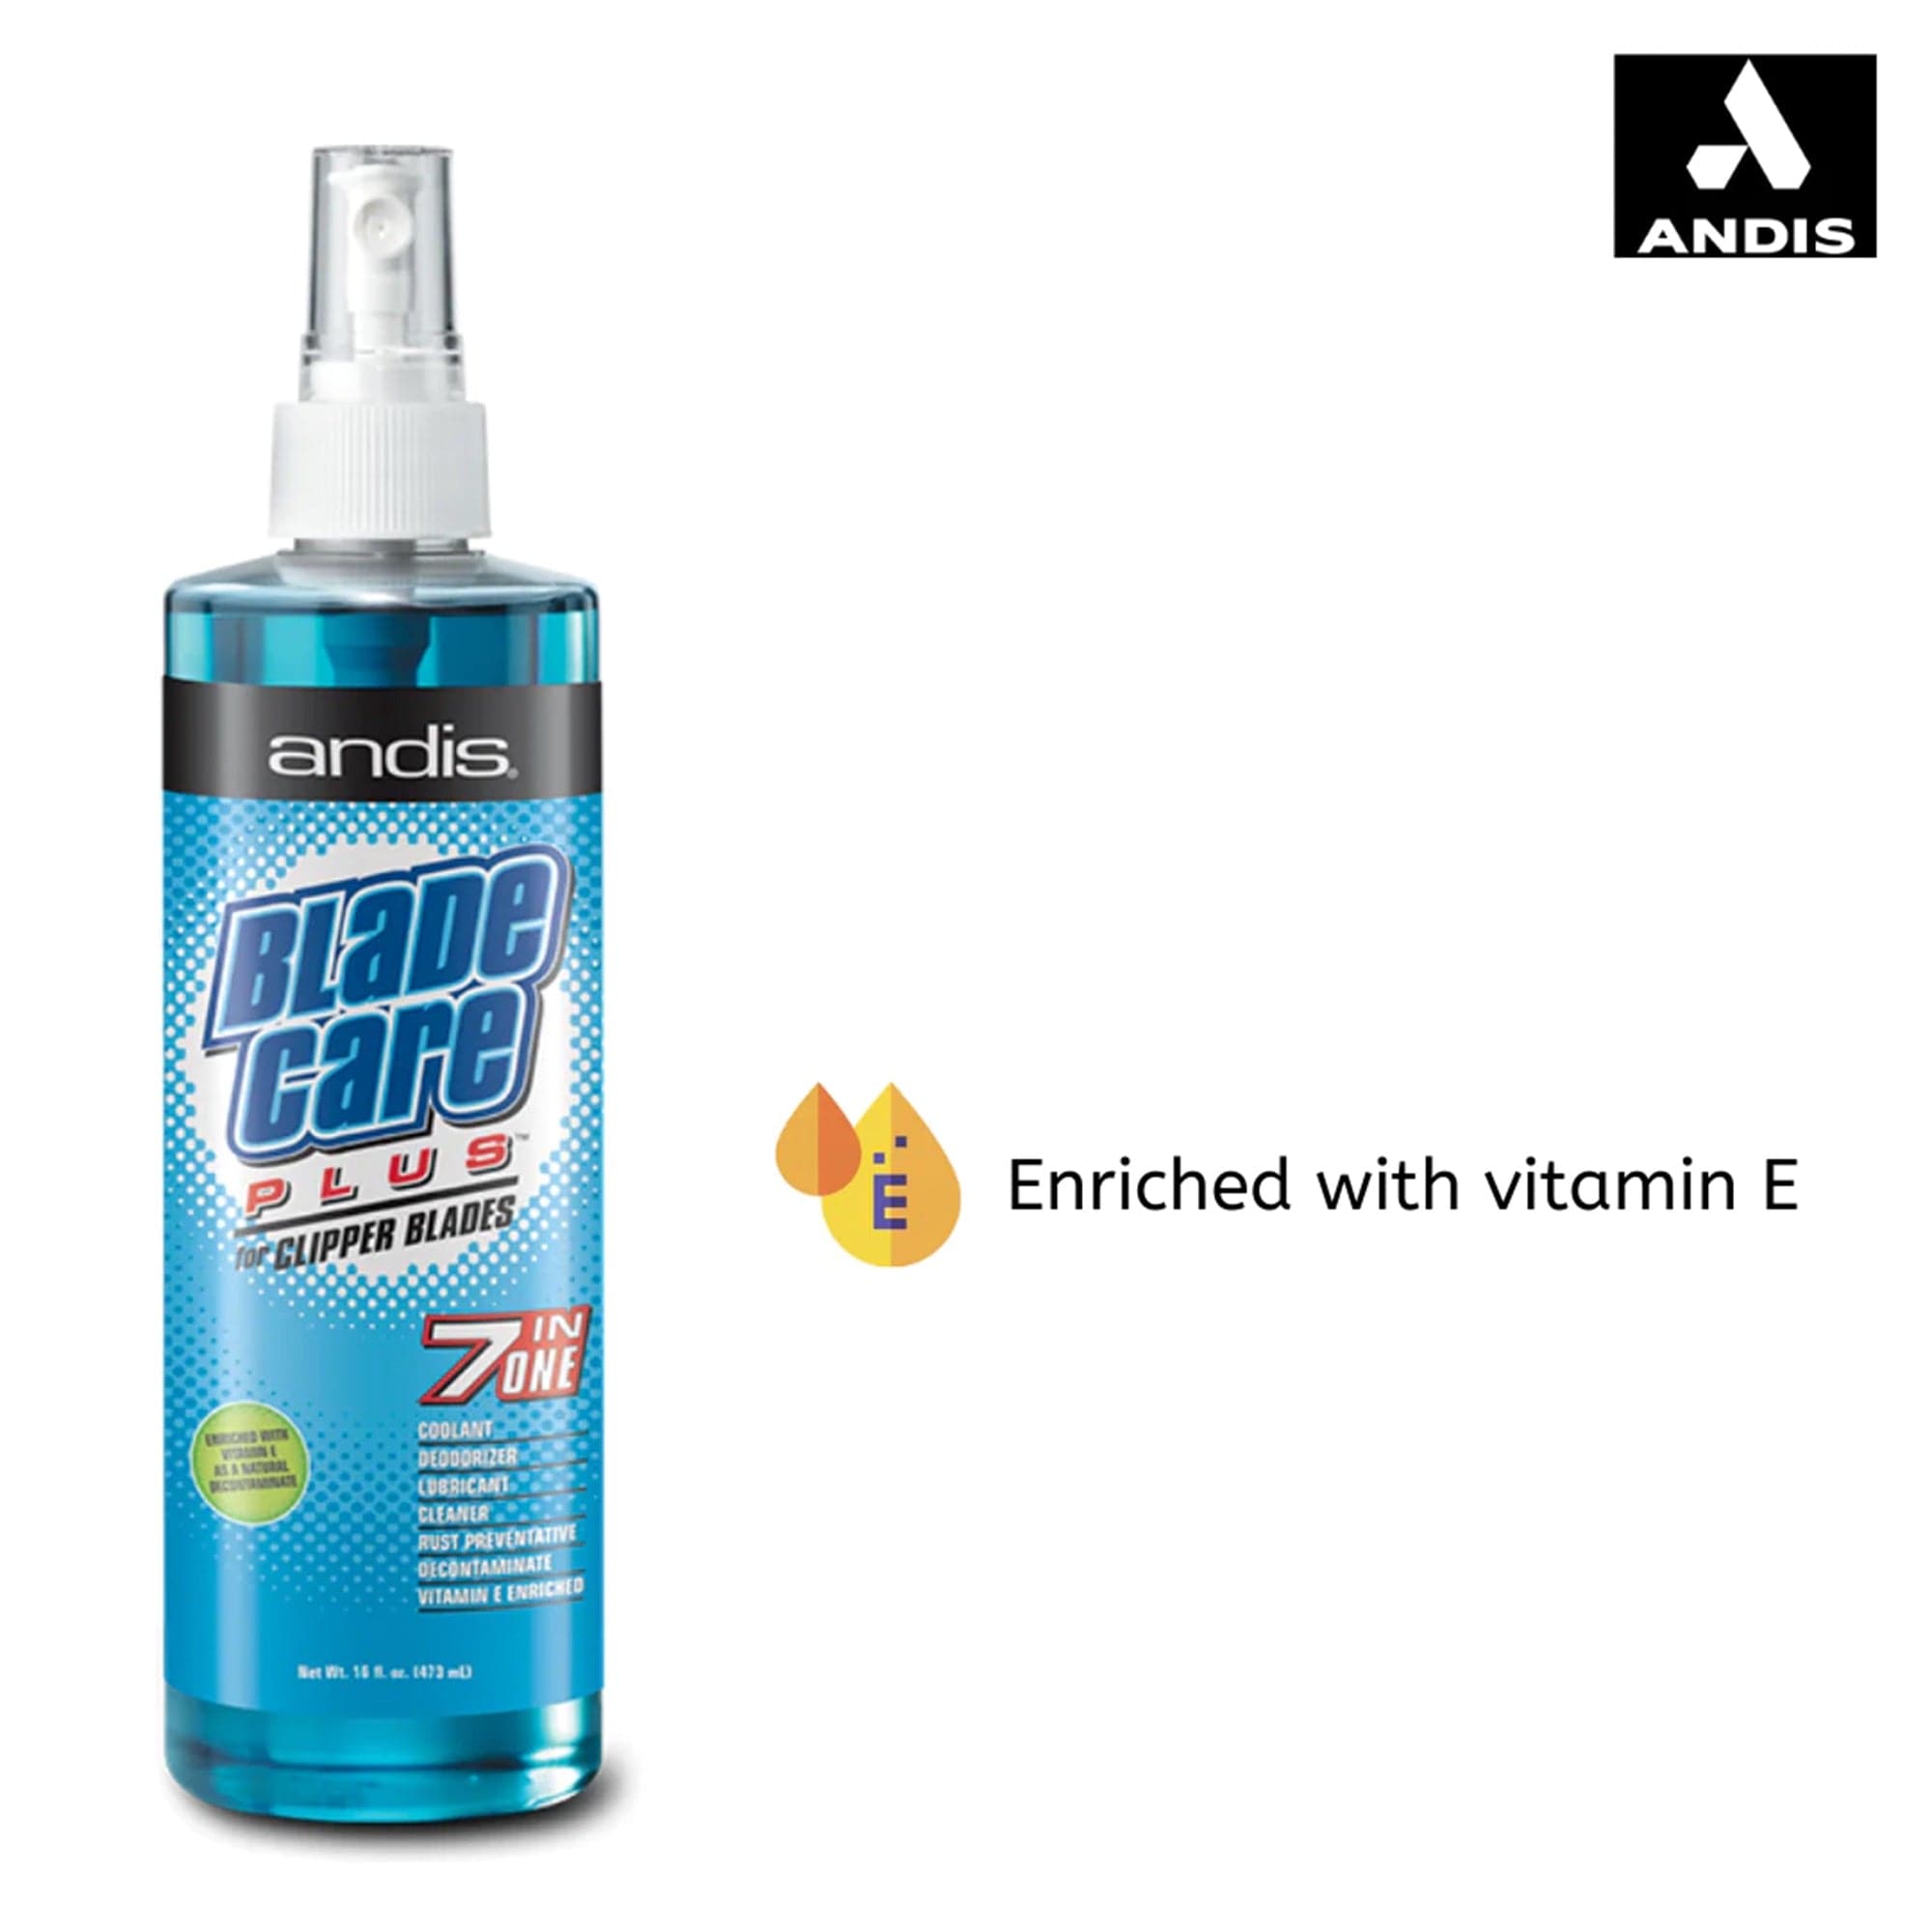 Andis - Blade Care Plus 7 in 1 Cleaner Spray 473ml - Eson Direct